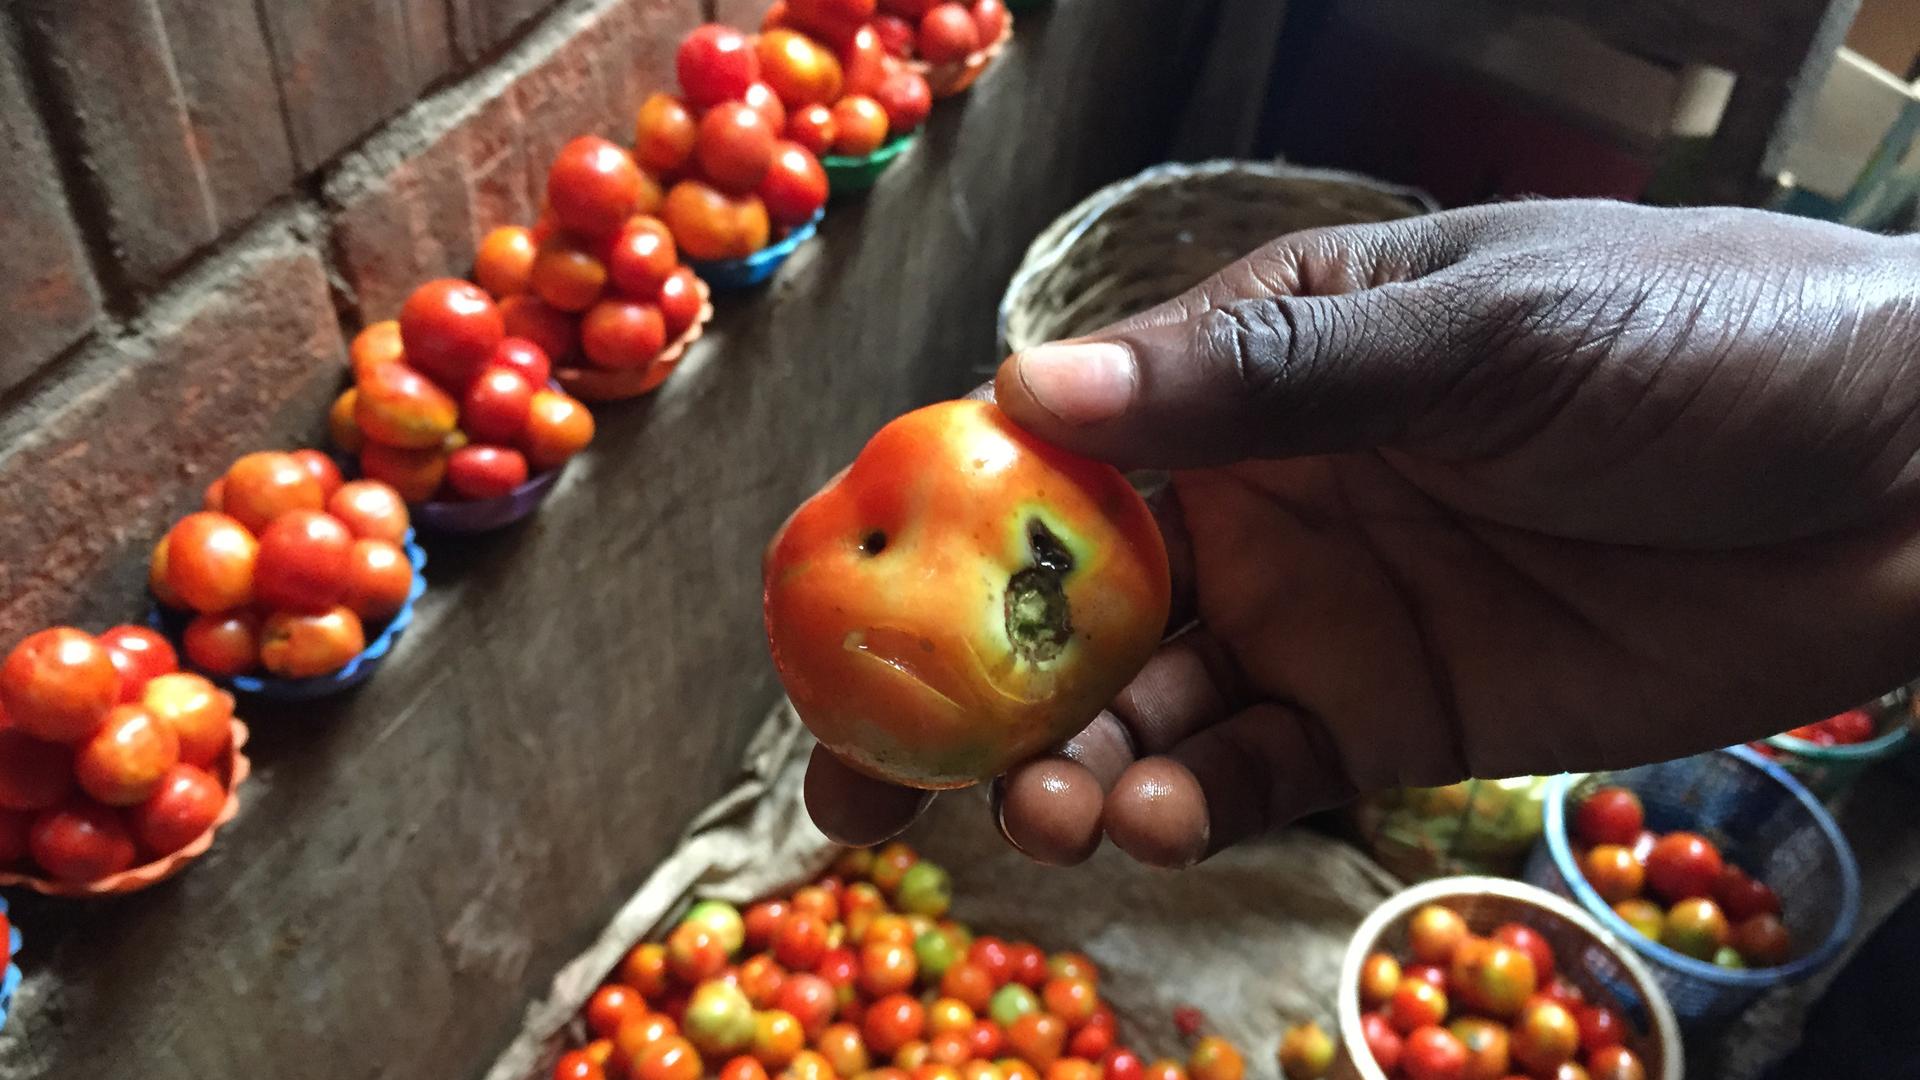 In a market in Abuja, a vendor named Abba shows me a puny tomato that was selling for 10 times the usual price. Some Nigerians have been calling tomatoes “Buhari’s gold,” after the president.